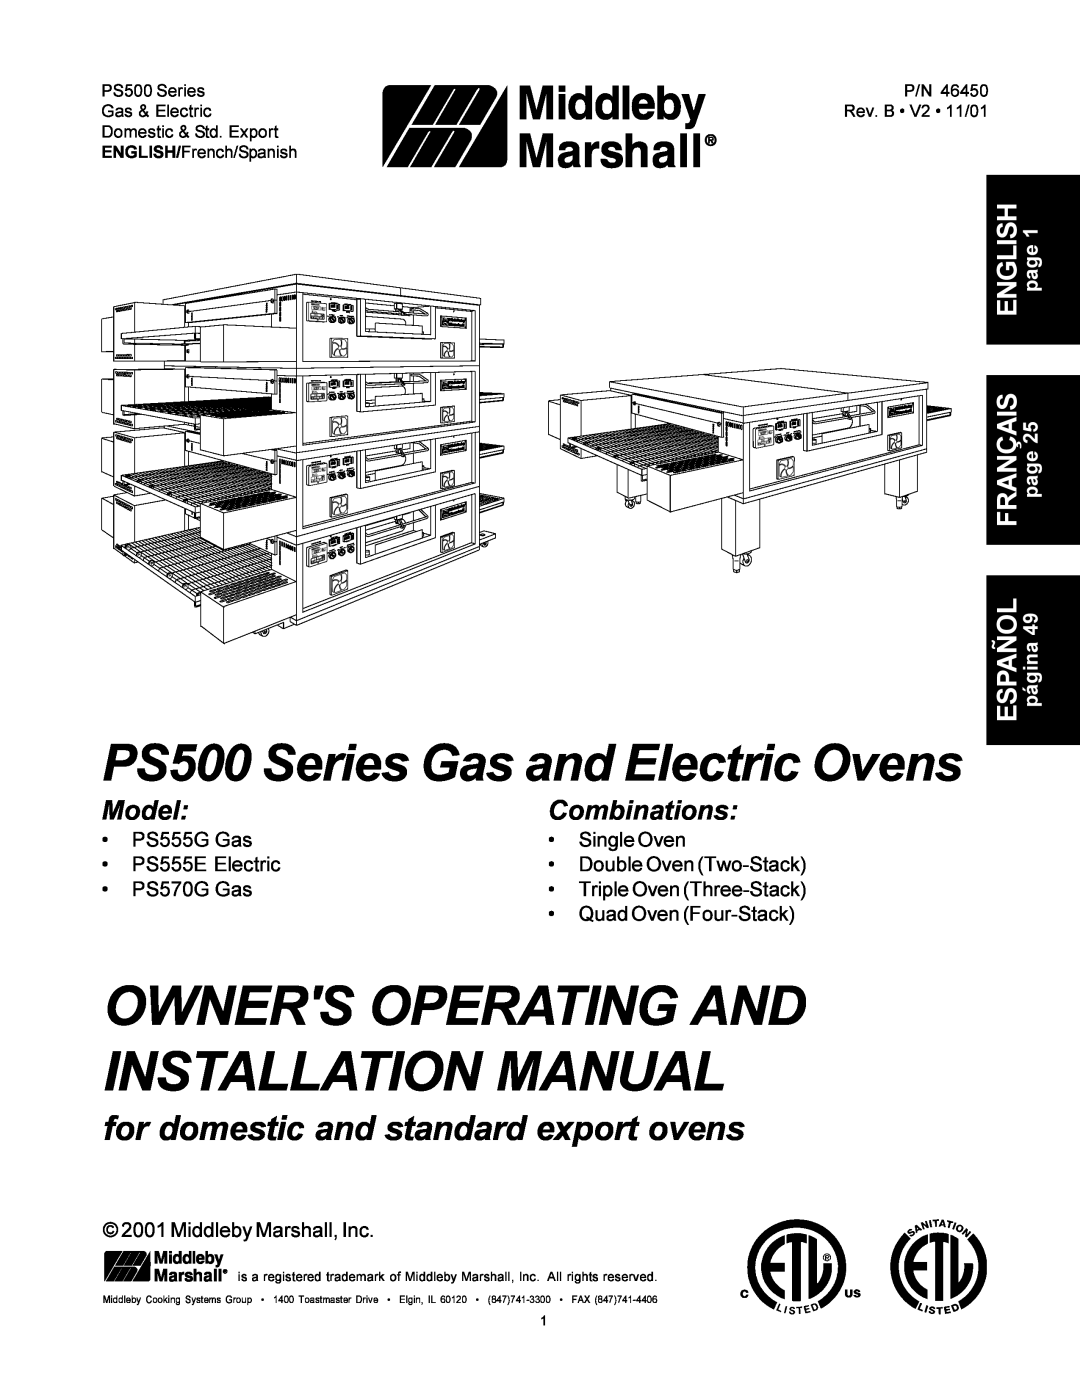 Middleby Marshall PS500 installation manual Owners Operating And Installation Manual, ModelCombinations, FRANÇAIS page 